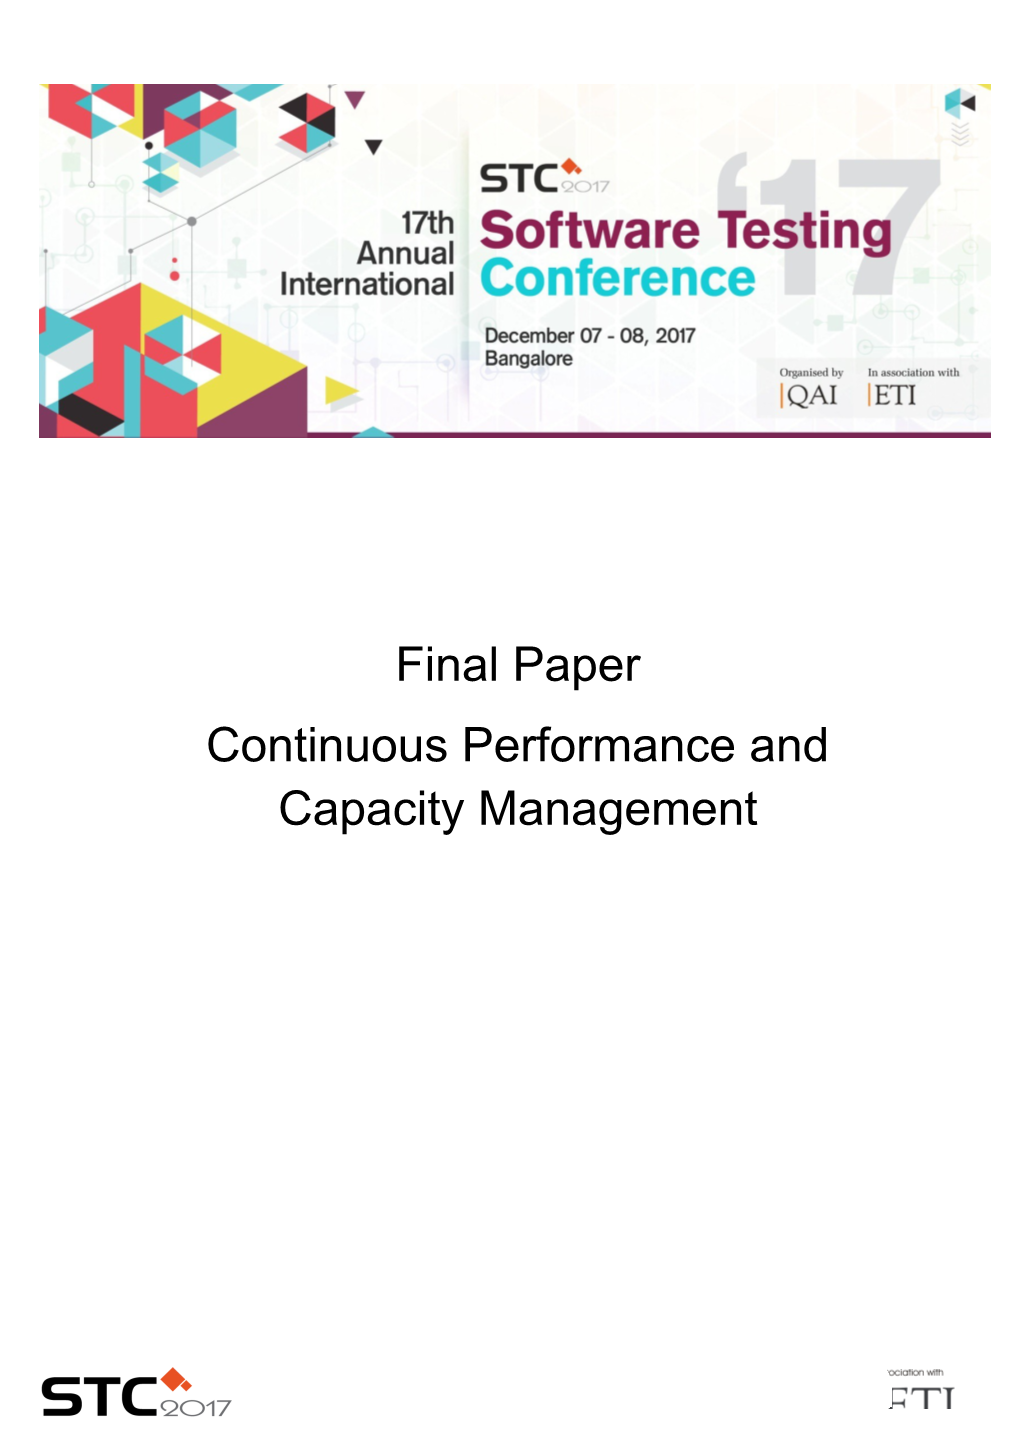 Continuous Performance and Capacity Management